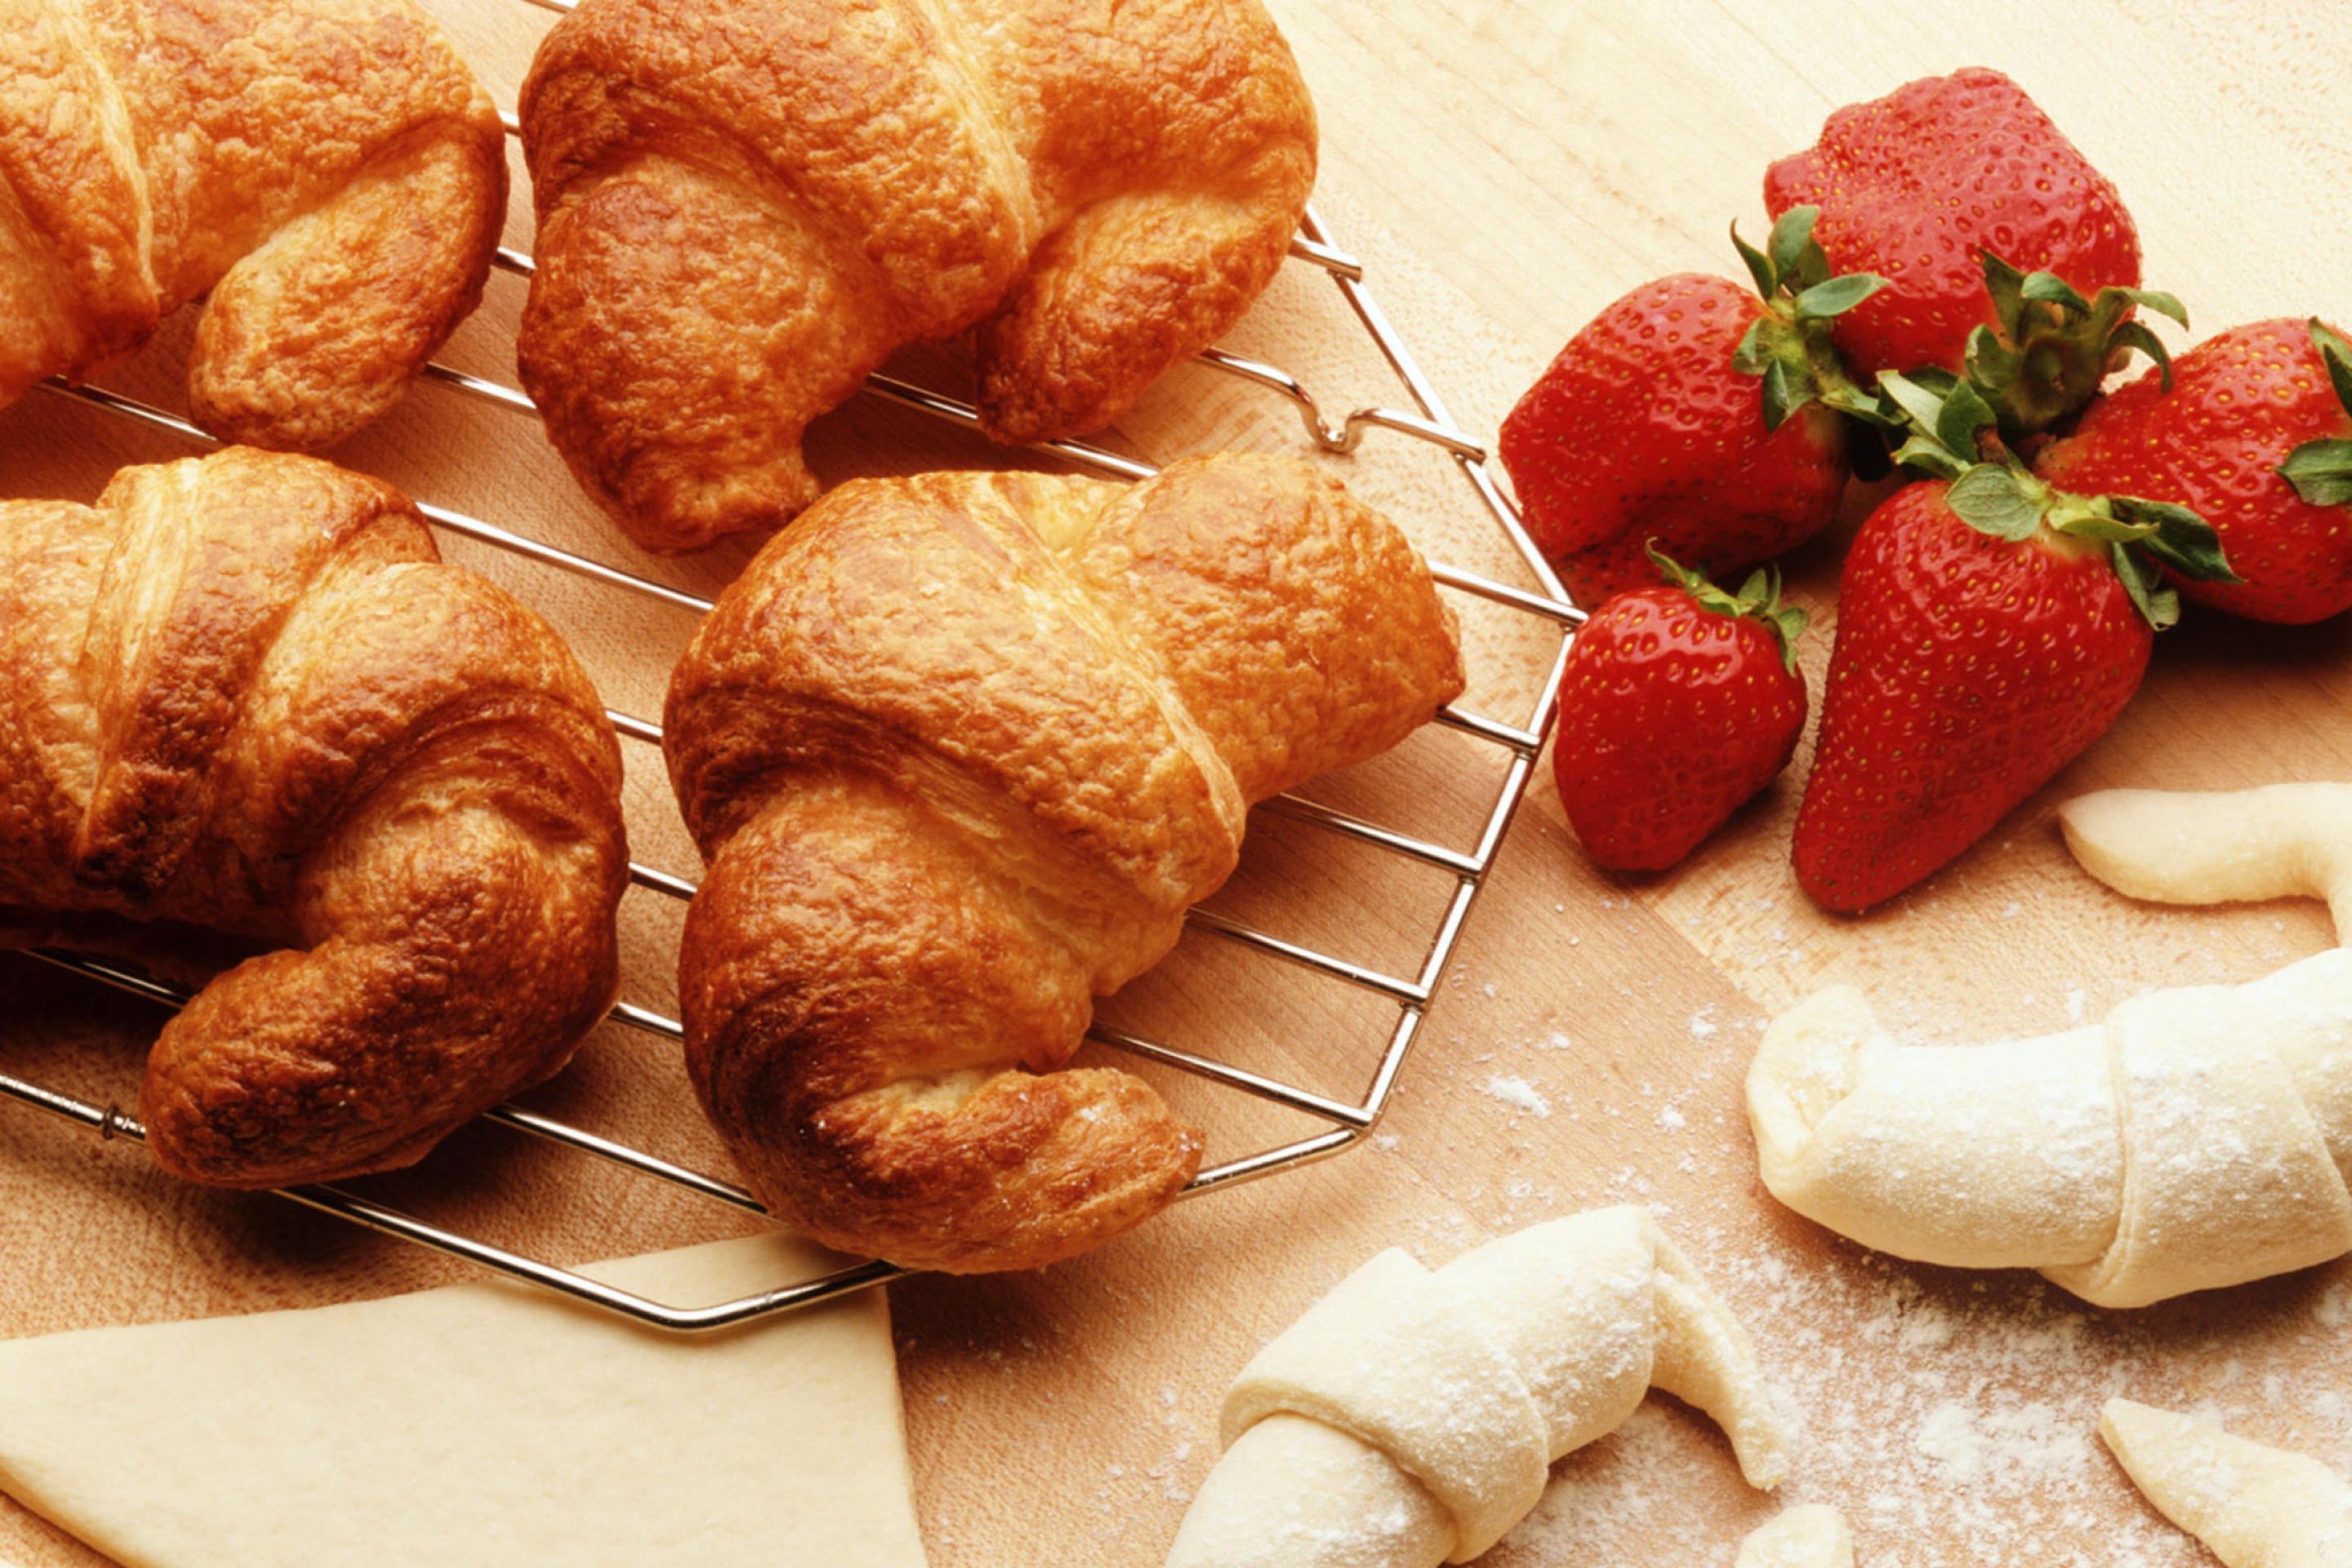 Croissants And Strawberries wallpaper 2880x1920